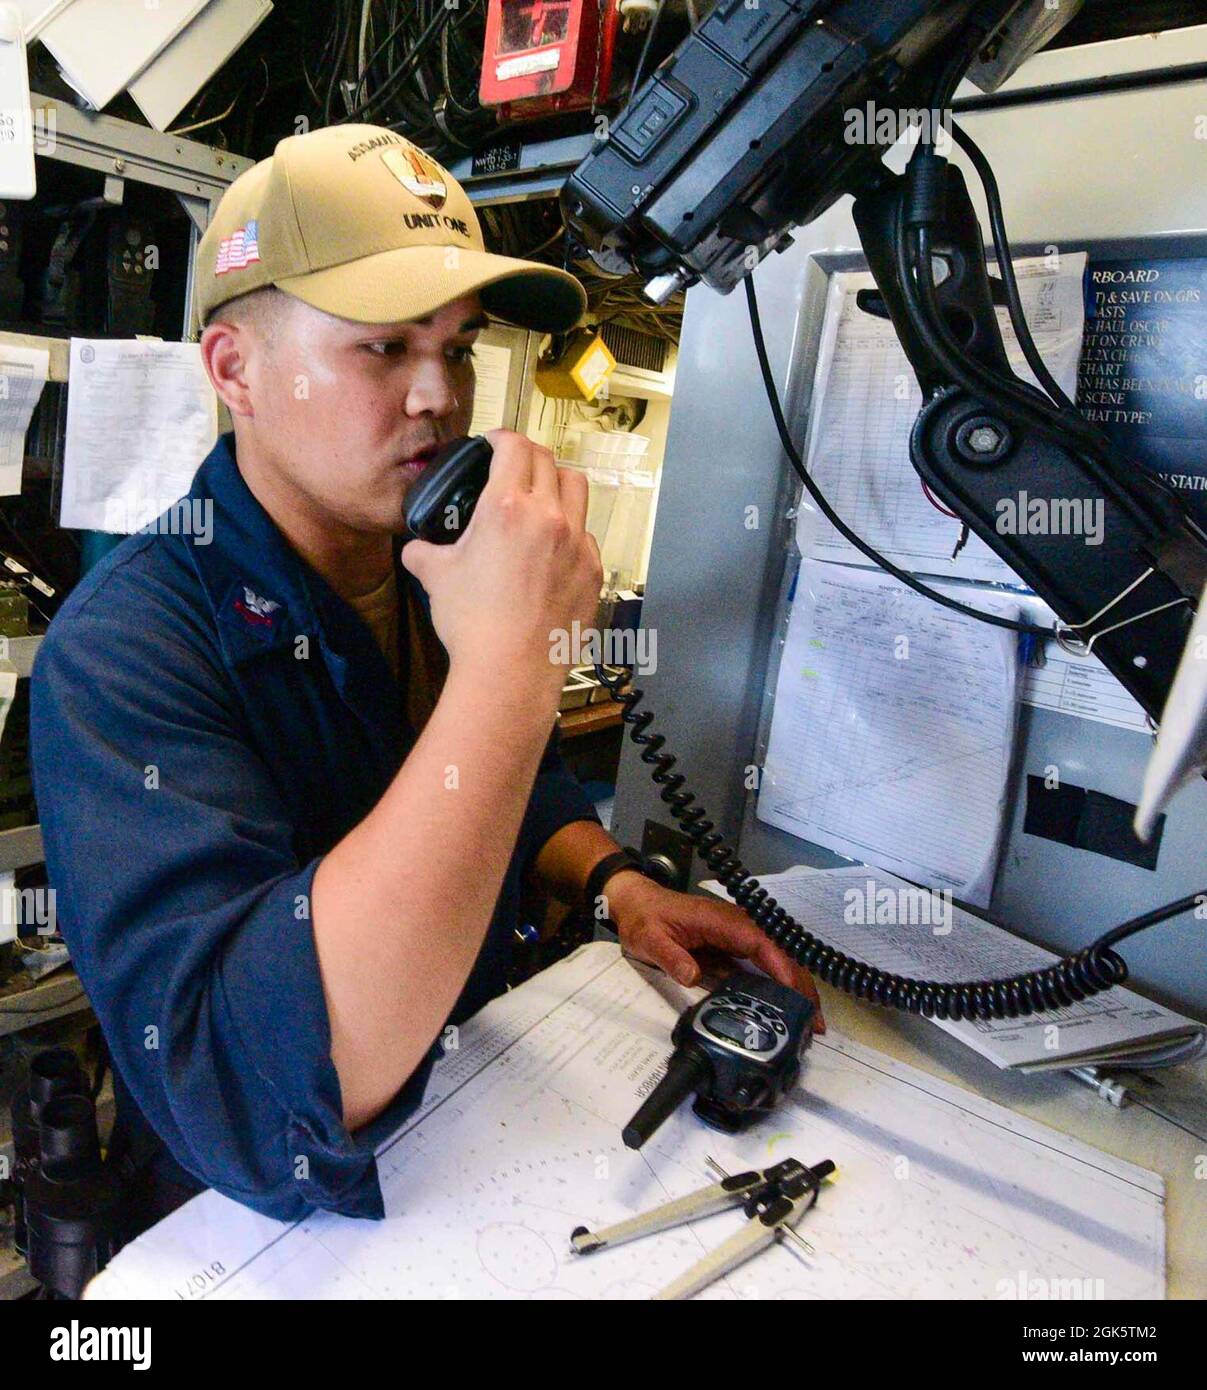 210810-N-MT581-1742    PACIFIC OCEAN (Aug. 10, 2021) Quartermaster 2nd Class Jaric Andaya, from San Diego, assigned to Assault Craft Unit (ACU) 1, contacts Tinian Port Operations from aboard a Landing Craft, Utility (LCU) carrying vehicles and supplies ashore during exercise Freedom Banner 2021, Aug. 10. Freedom Banner is an annual exercise that involves strategic projection of the Maritime Prepositioning Force (MPF) and associated combat forces. This year’s iteration supports Large Scale Exercise (LSE) 2021, which is designed to refine how we synchronize maritime operation across multiple Fle Stock Photo